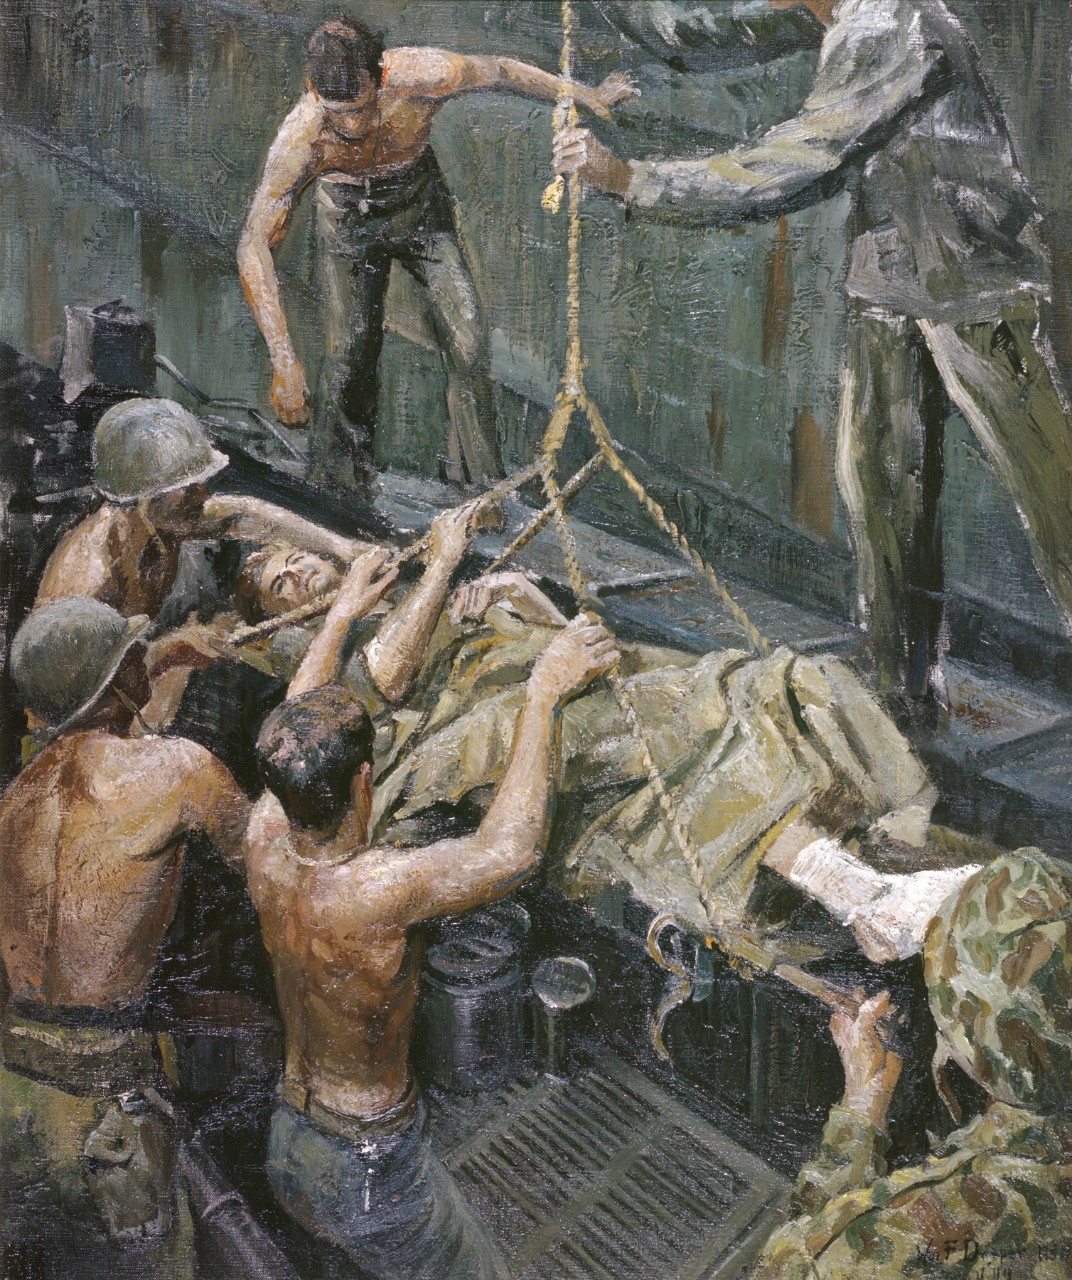 A wounded man being brought aboard a ship